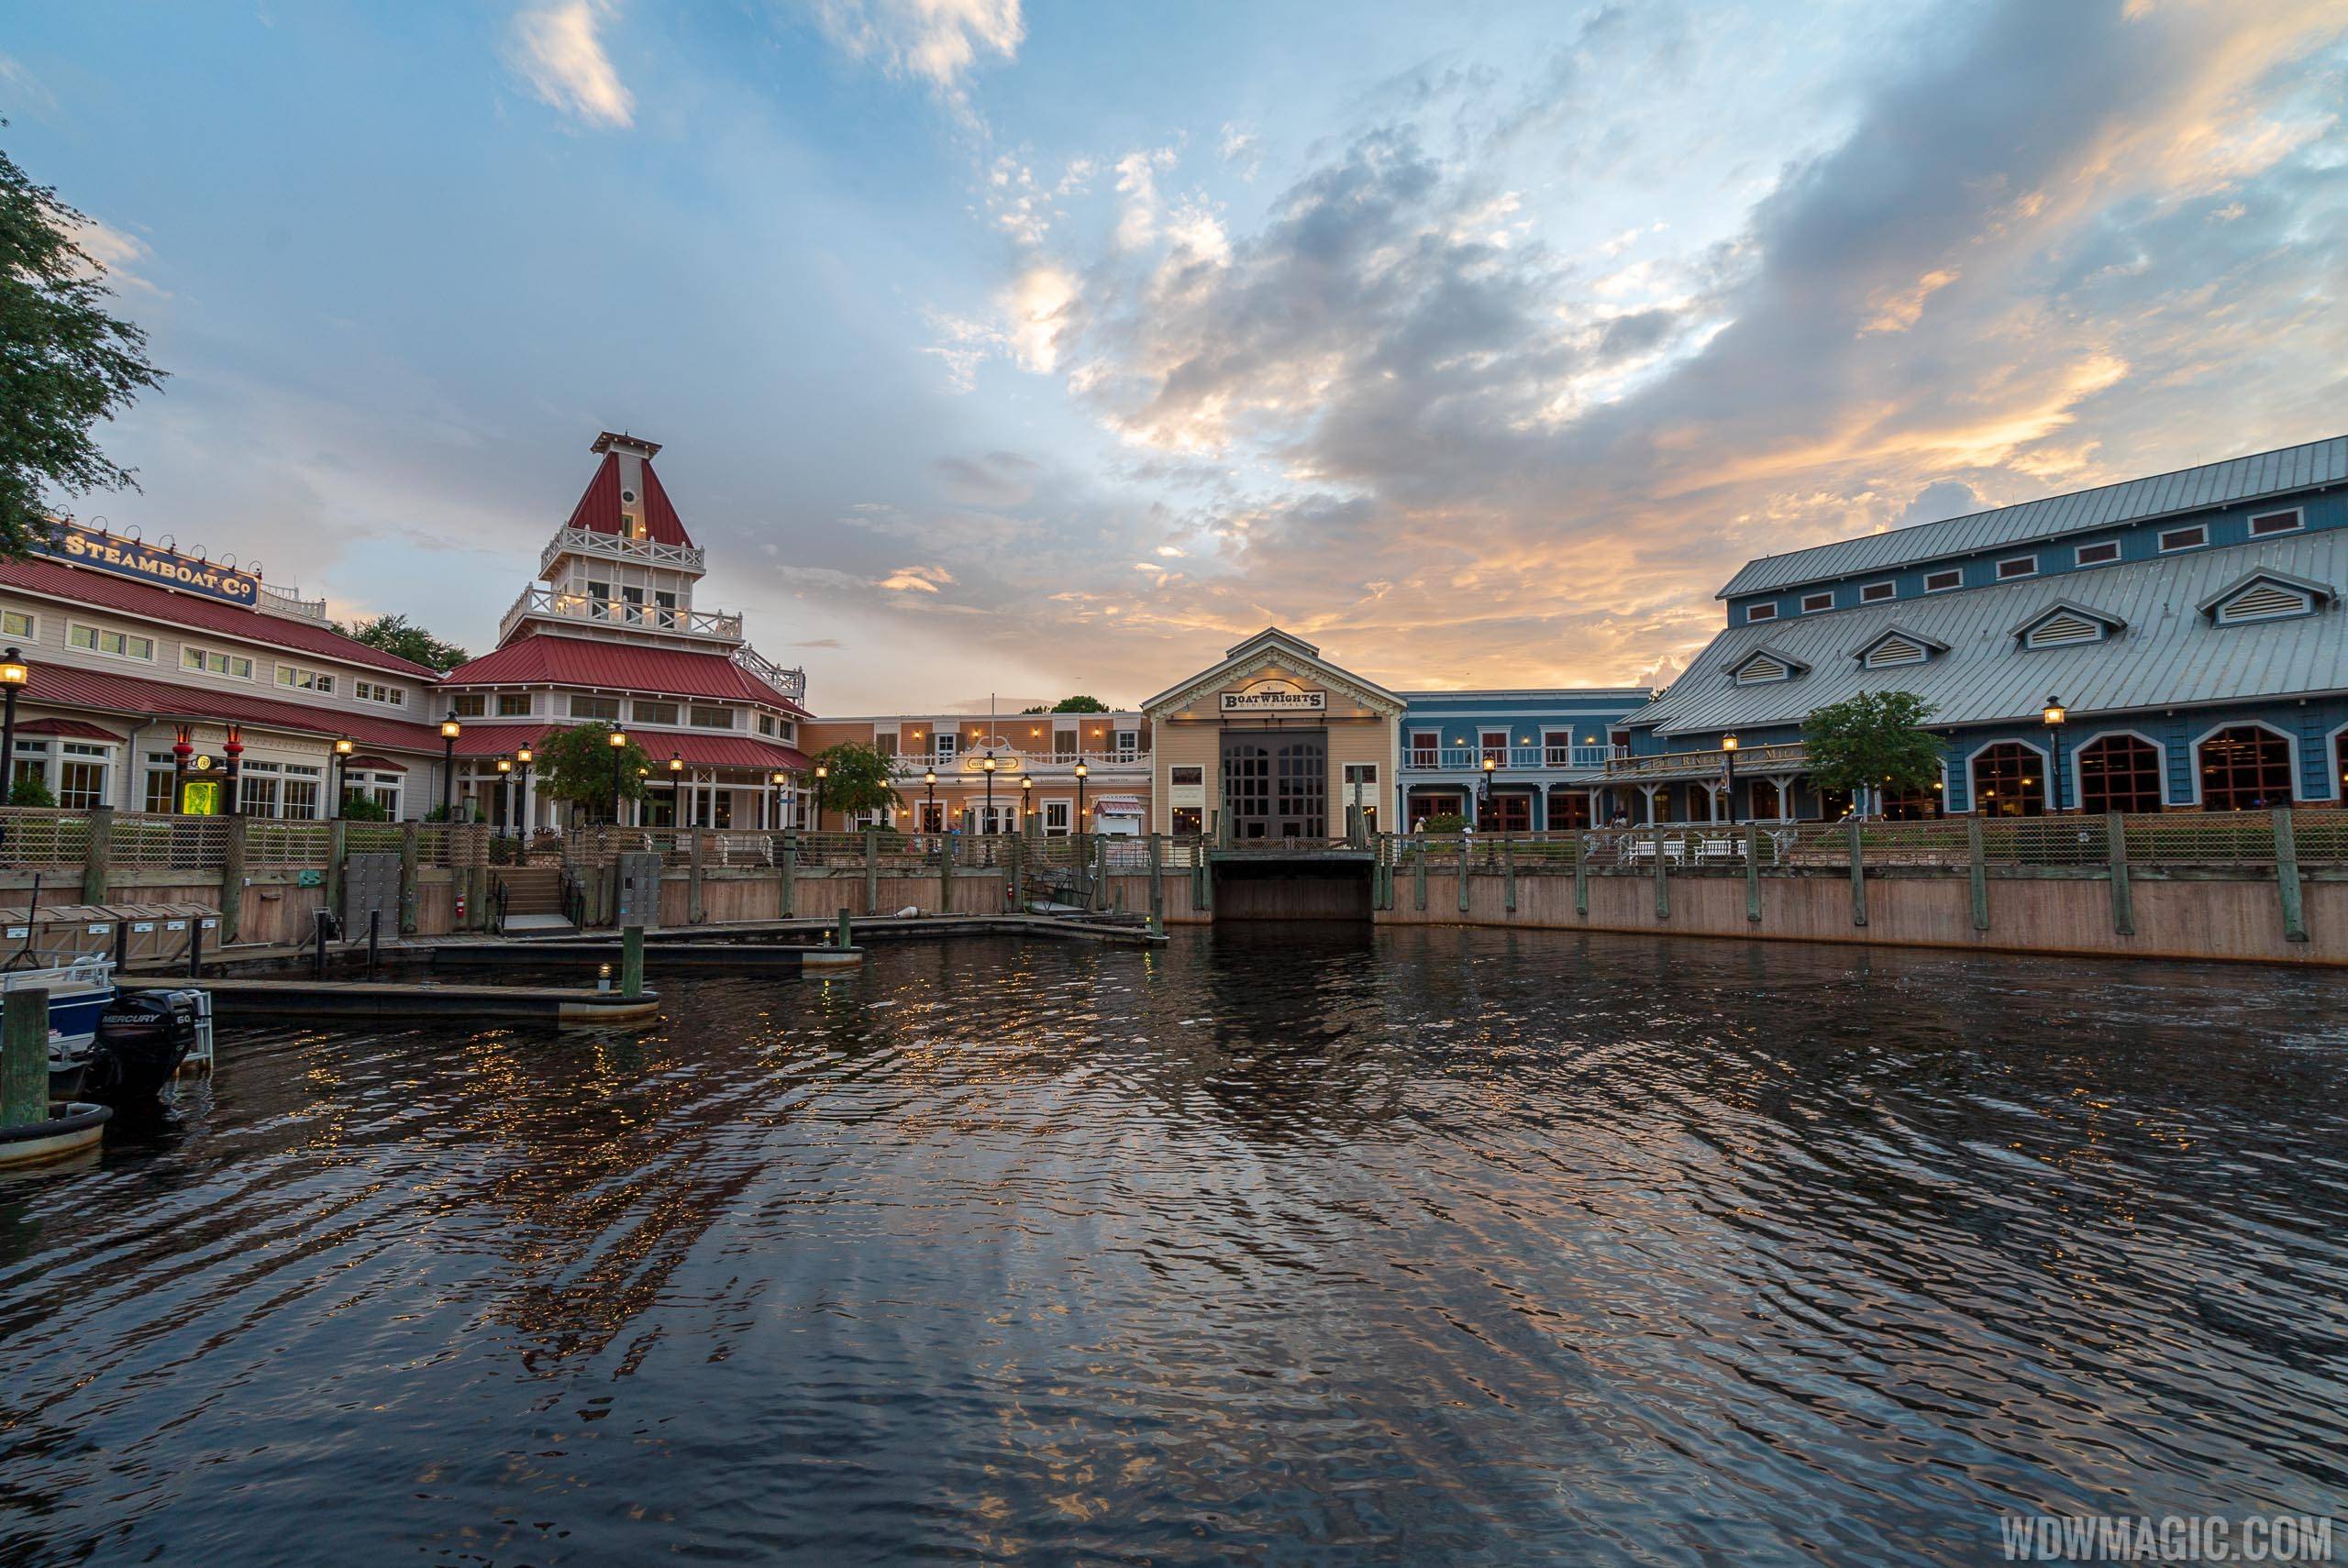 Save up to 35% at Port Orleans Riverside this summer